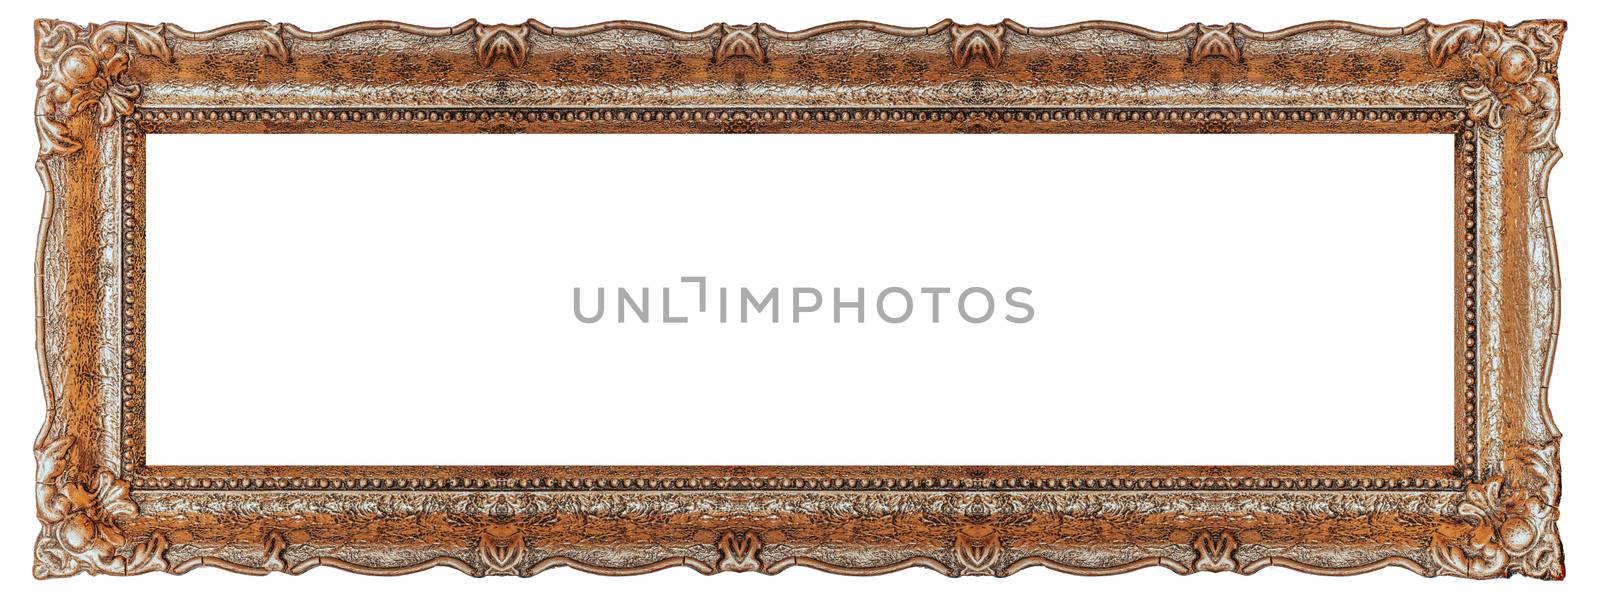 Copper picture frame with empty background copy space - Stock image decorative design element